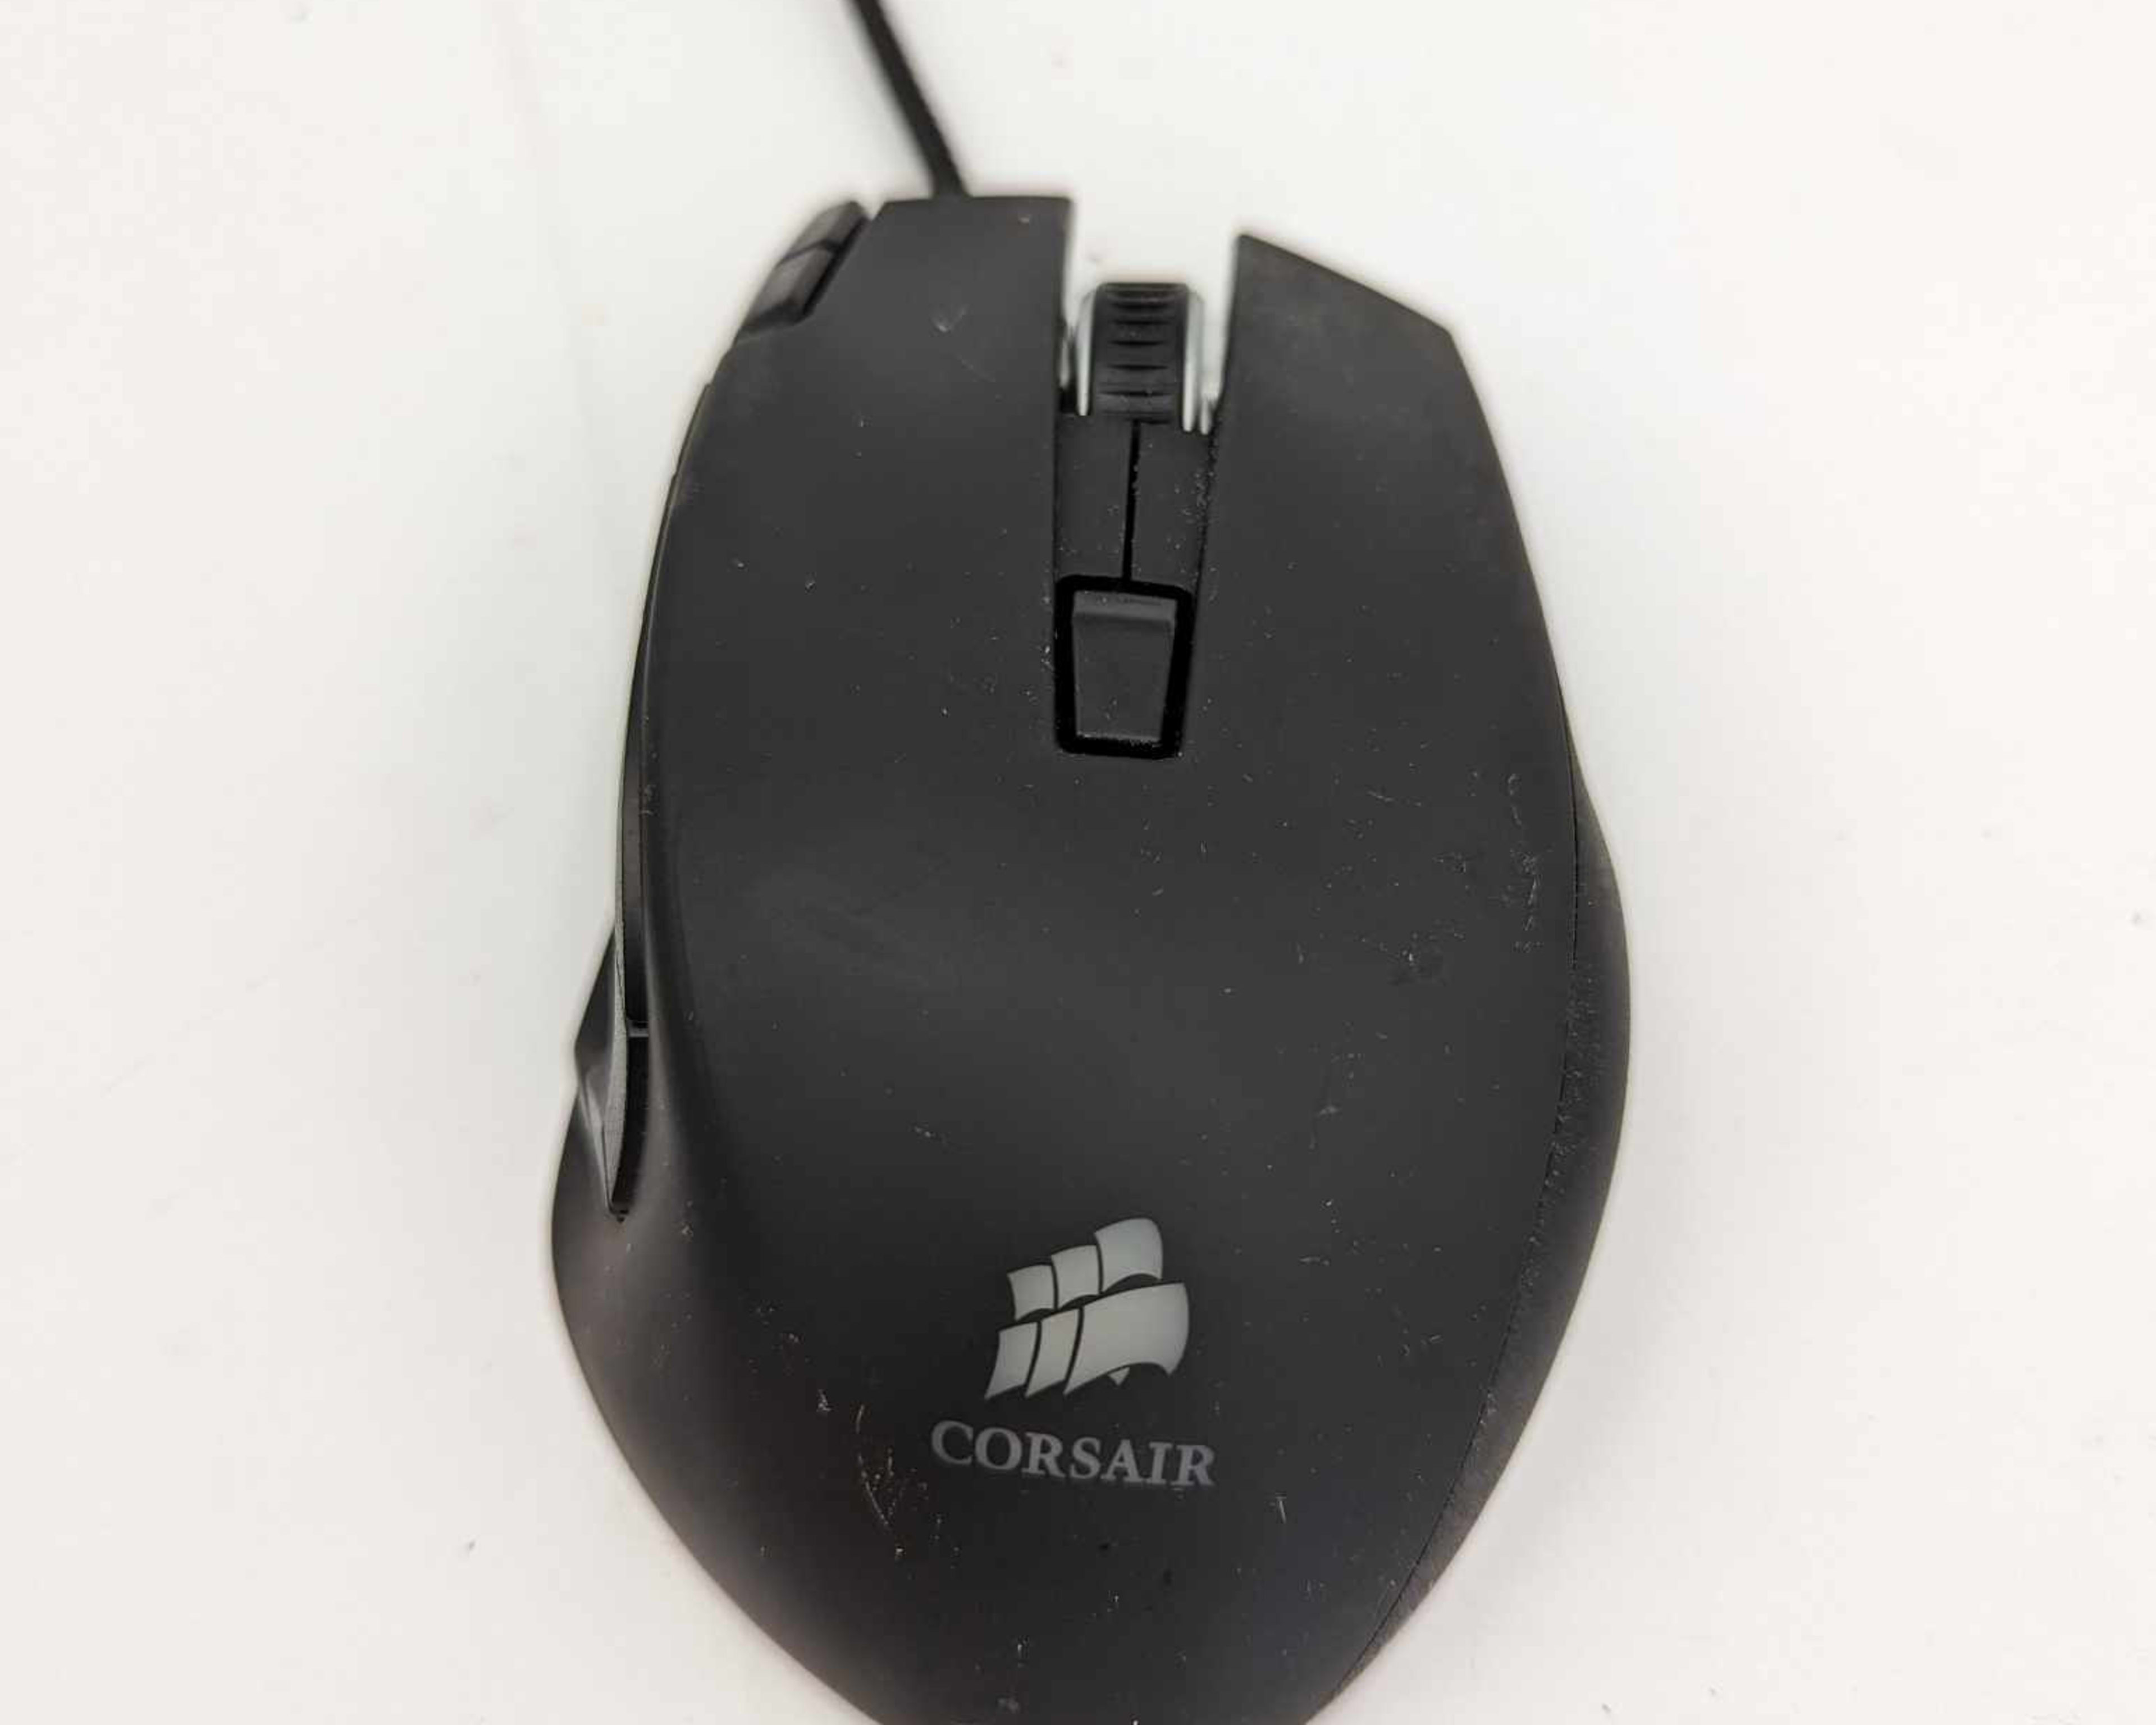 Corsair Vengeance M95 Wired Laser Gaming Mouse